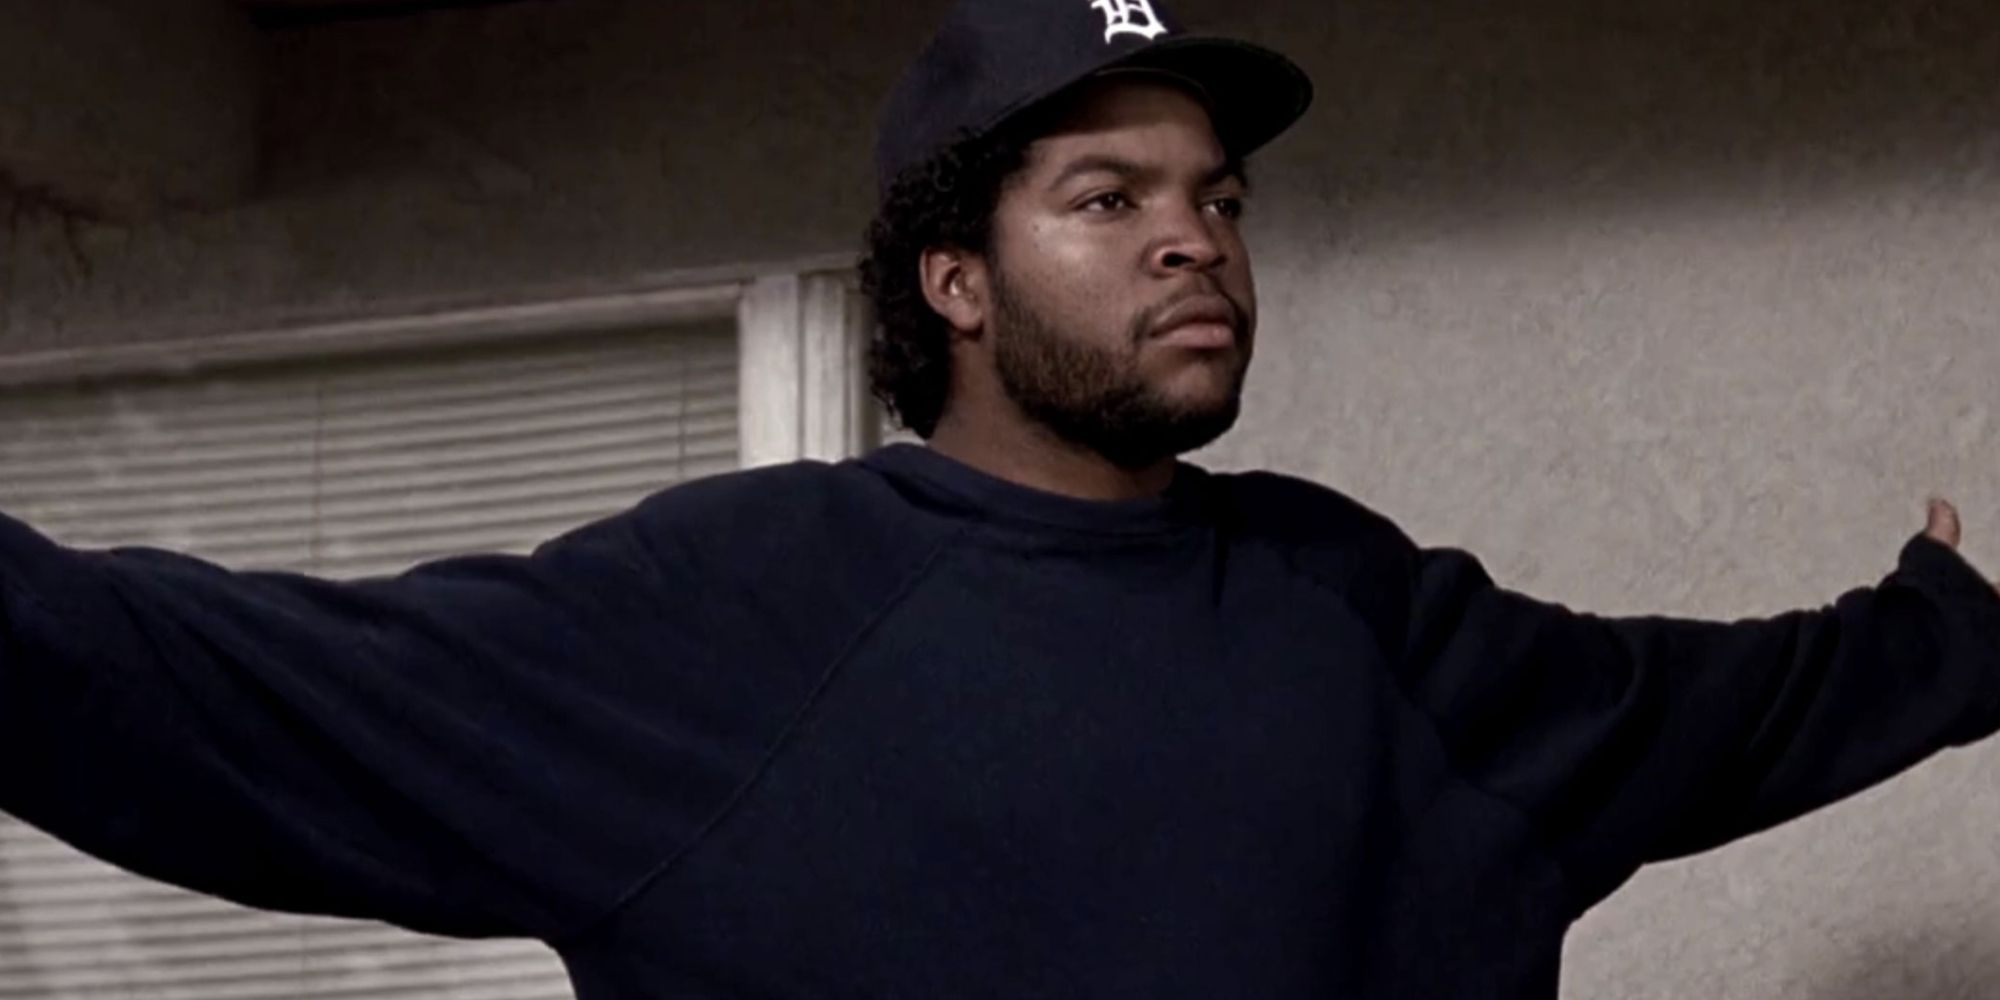 Doughboy spreading his arms and looking proud in Boyz n the Hood